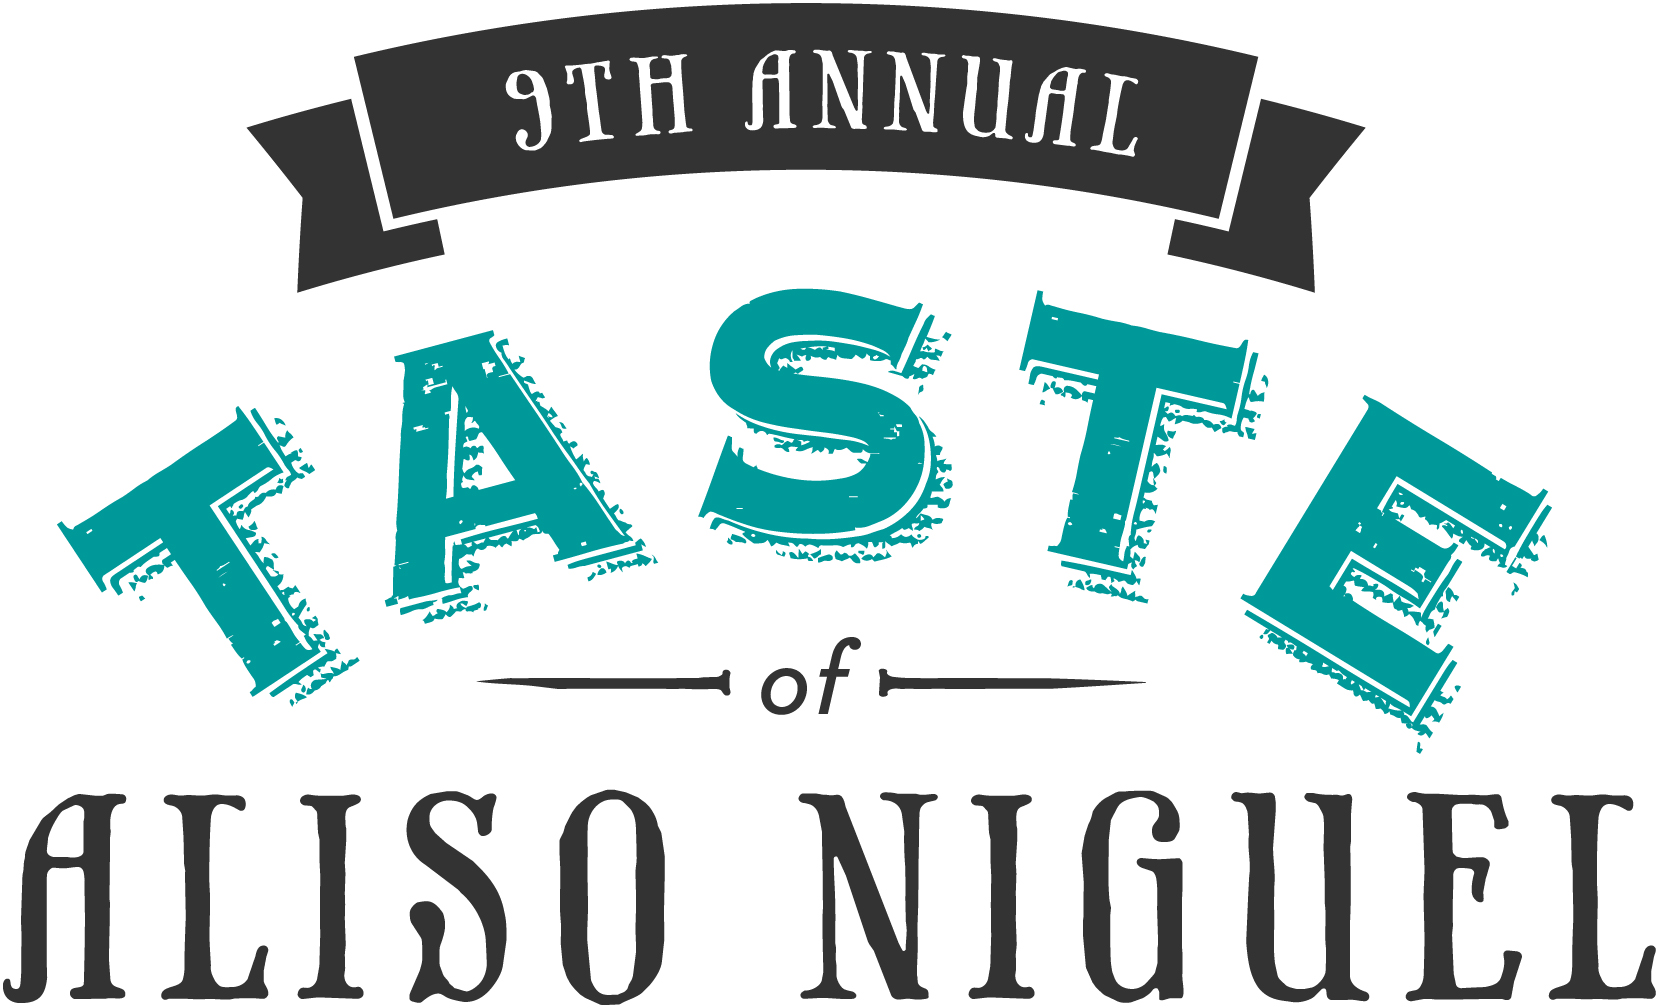 2016 Taste of Aliso Niguel to Dish Up Diverse Tastes WebWire